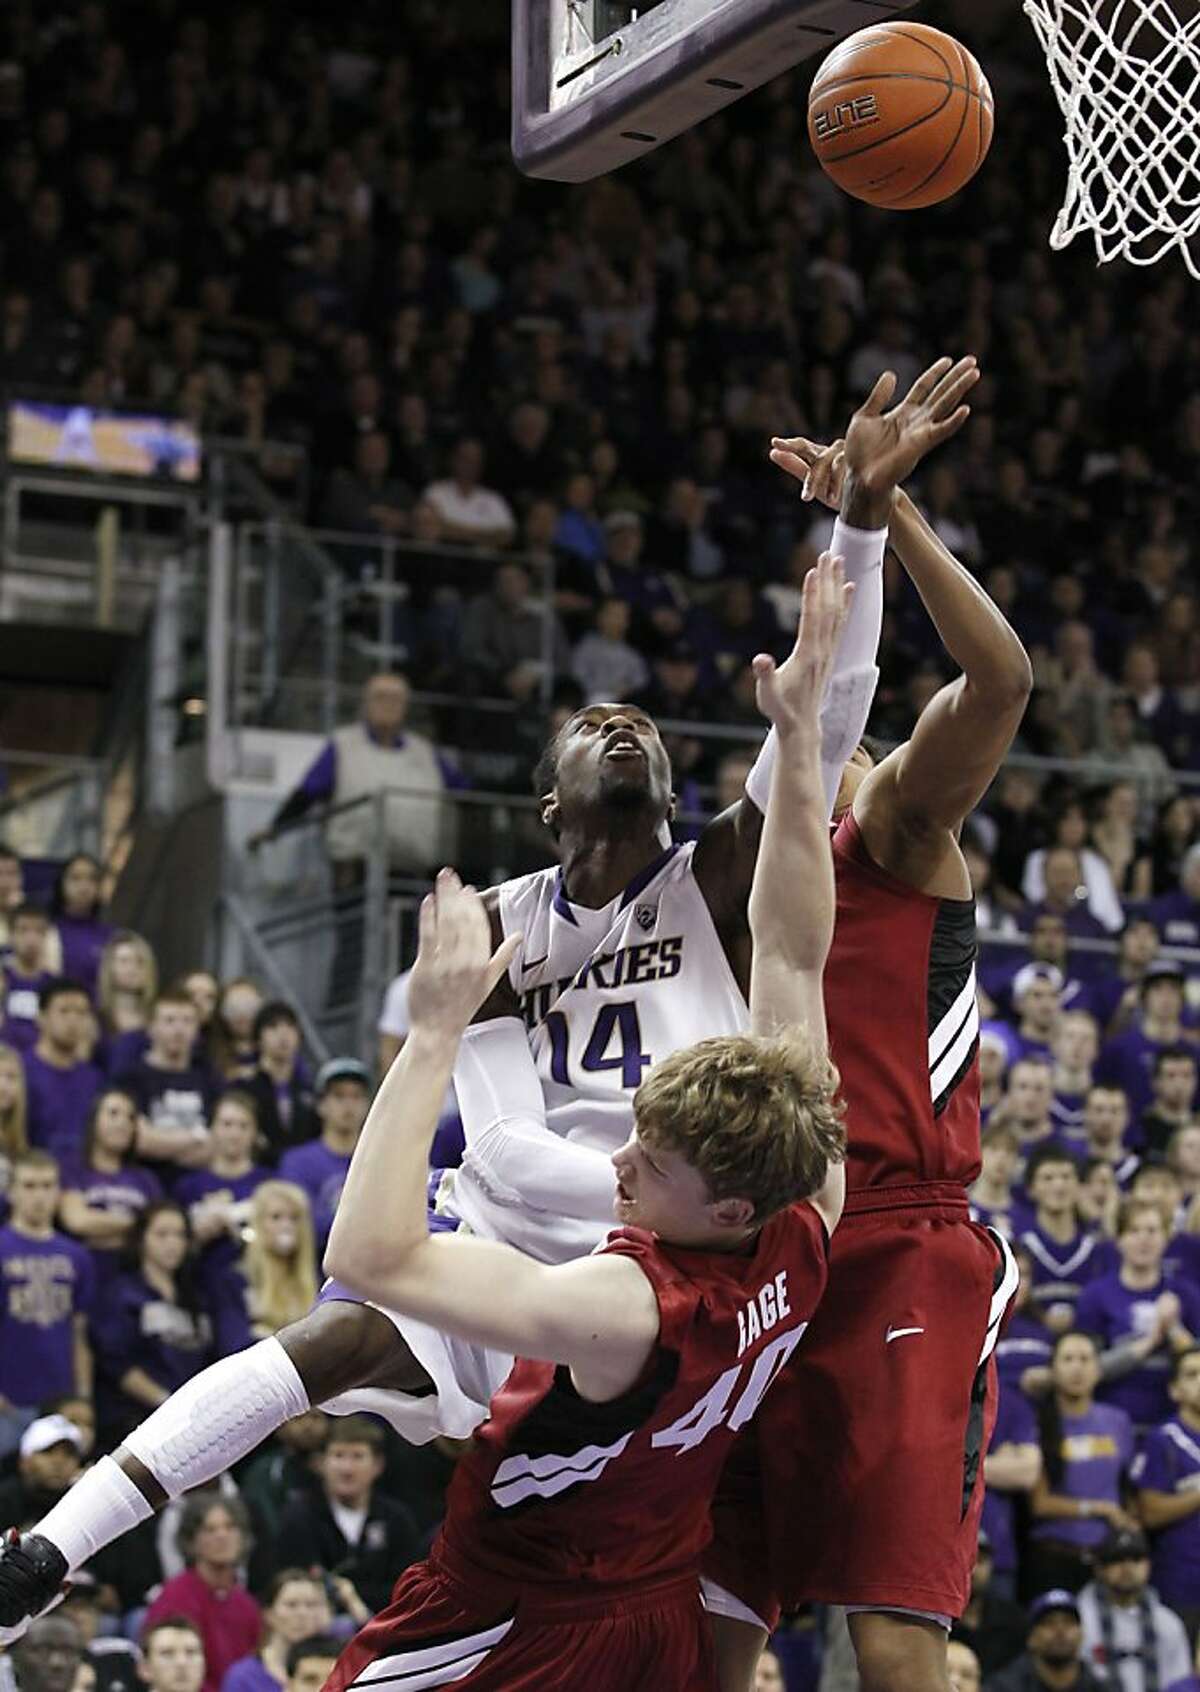 Washington's Tony Wroten (14) knocks down Stanford's John Gage on a drive in the second half of an NCAA college basketball game on Saturday, Jan. 21, 2012, in Seattle. Wroten was called for a foul on the play but scored a game-high 21 points. Washington won 76-63. (AP Photo/Elaine Thompson)